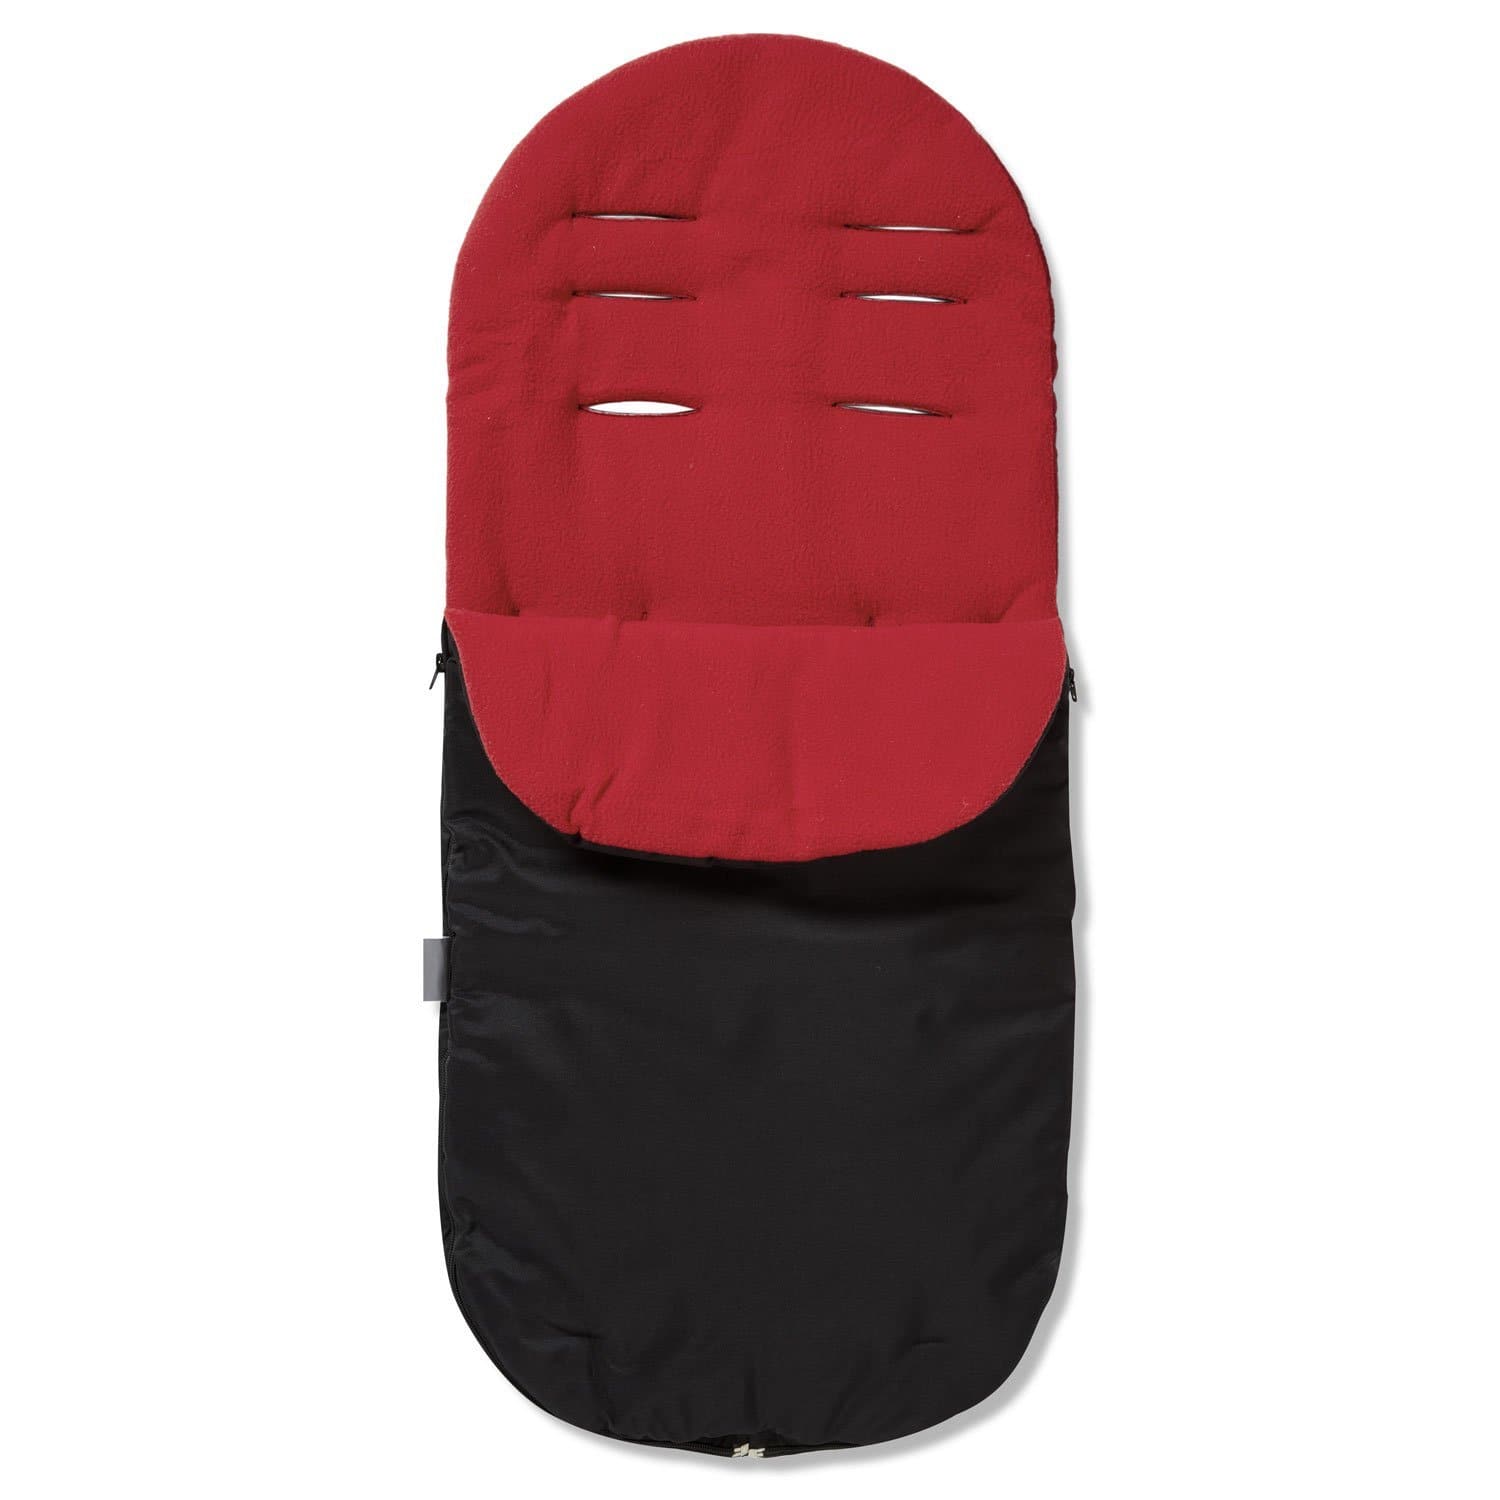 Footmuff / Cosy Toes Compatible with Phil & Teds - Red / Fits All Models | For Your Little One